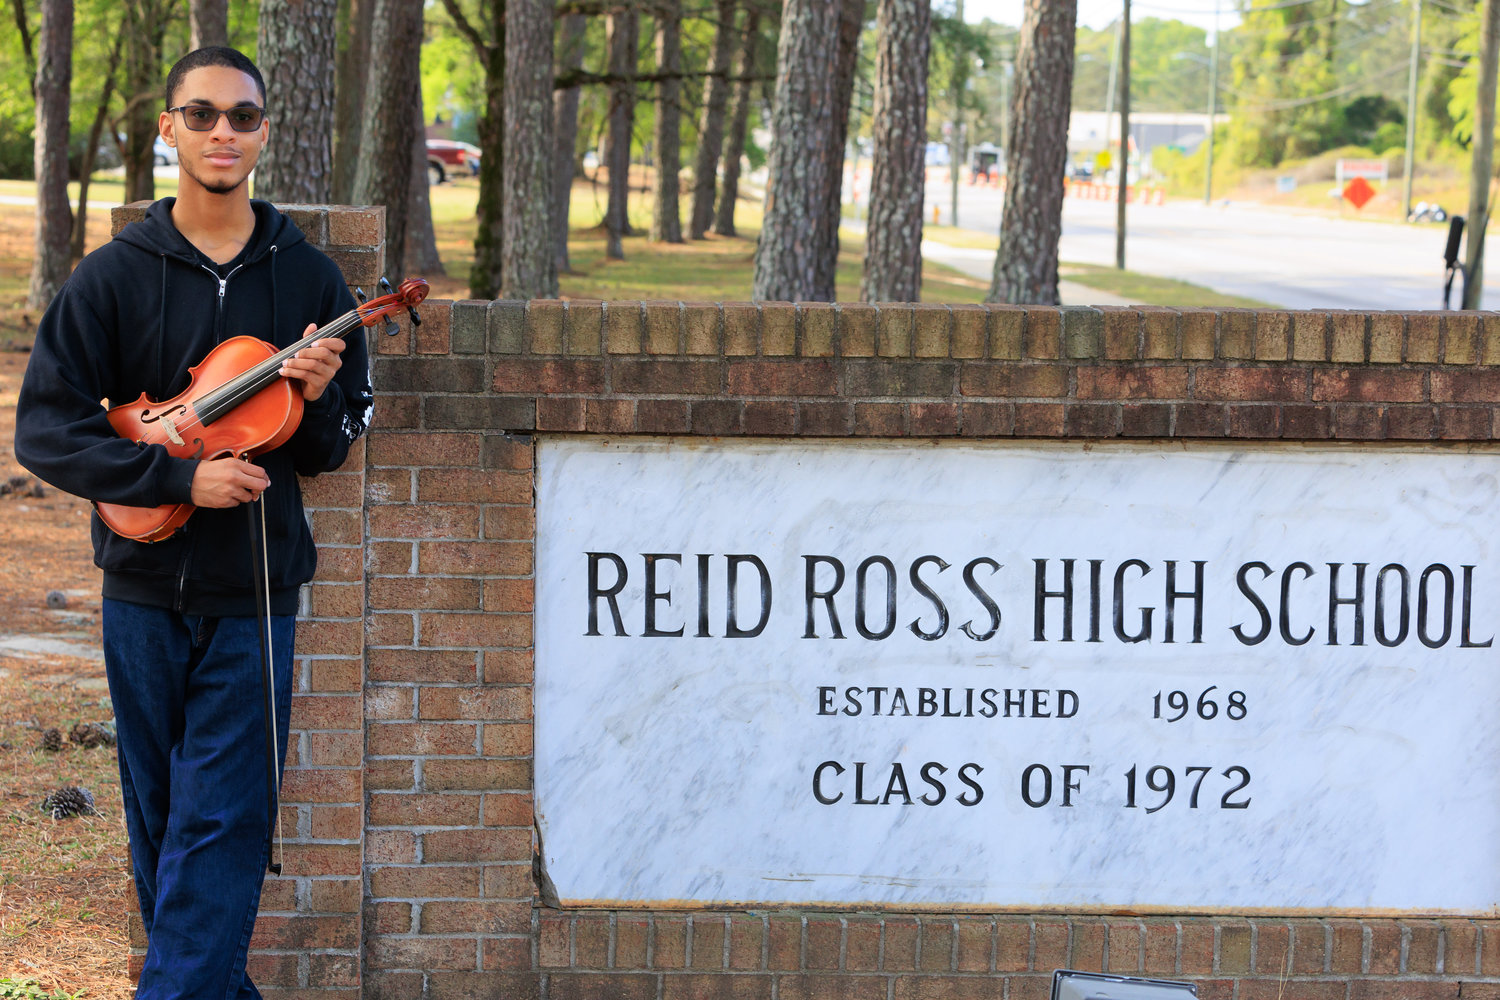 Miles Fowler will graduate from Reid Ross Classical School and study music at the University of North Carolina at Greensboro.